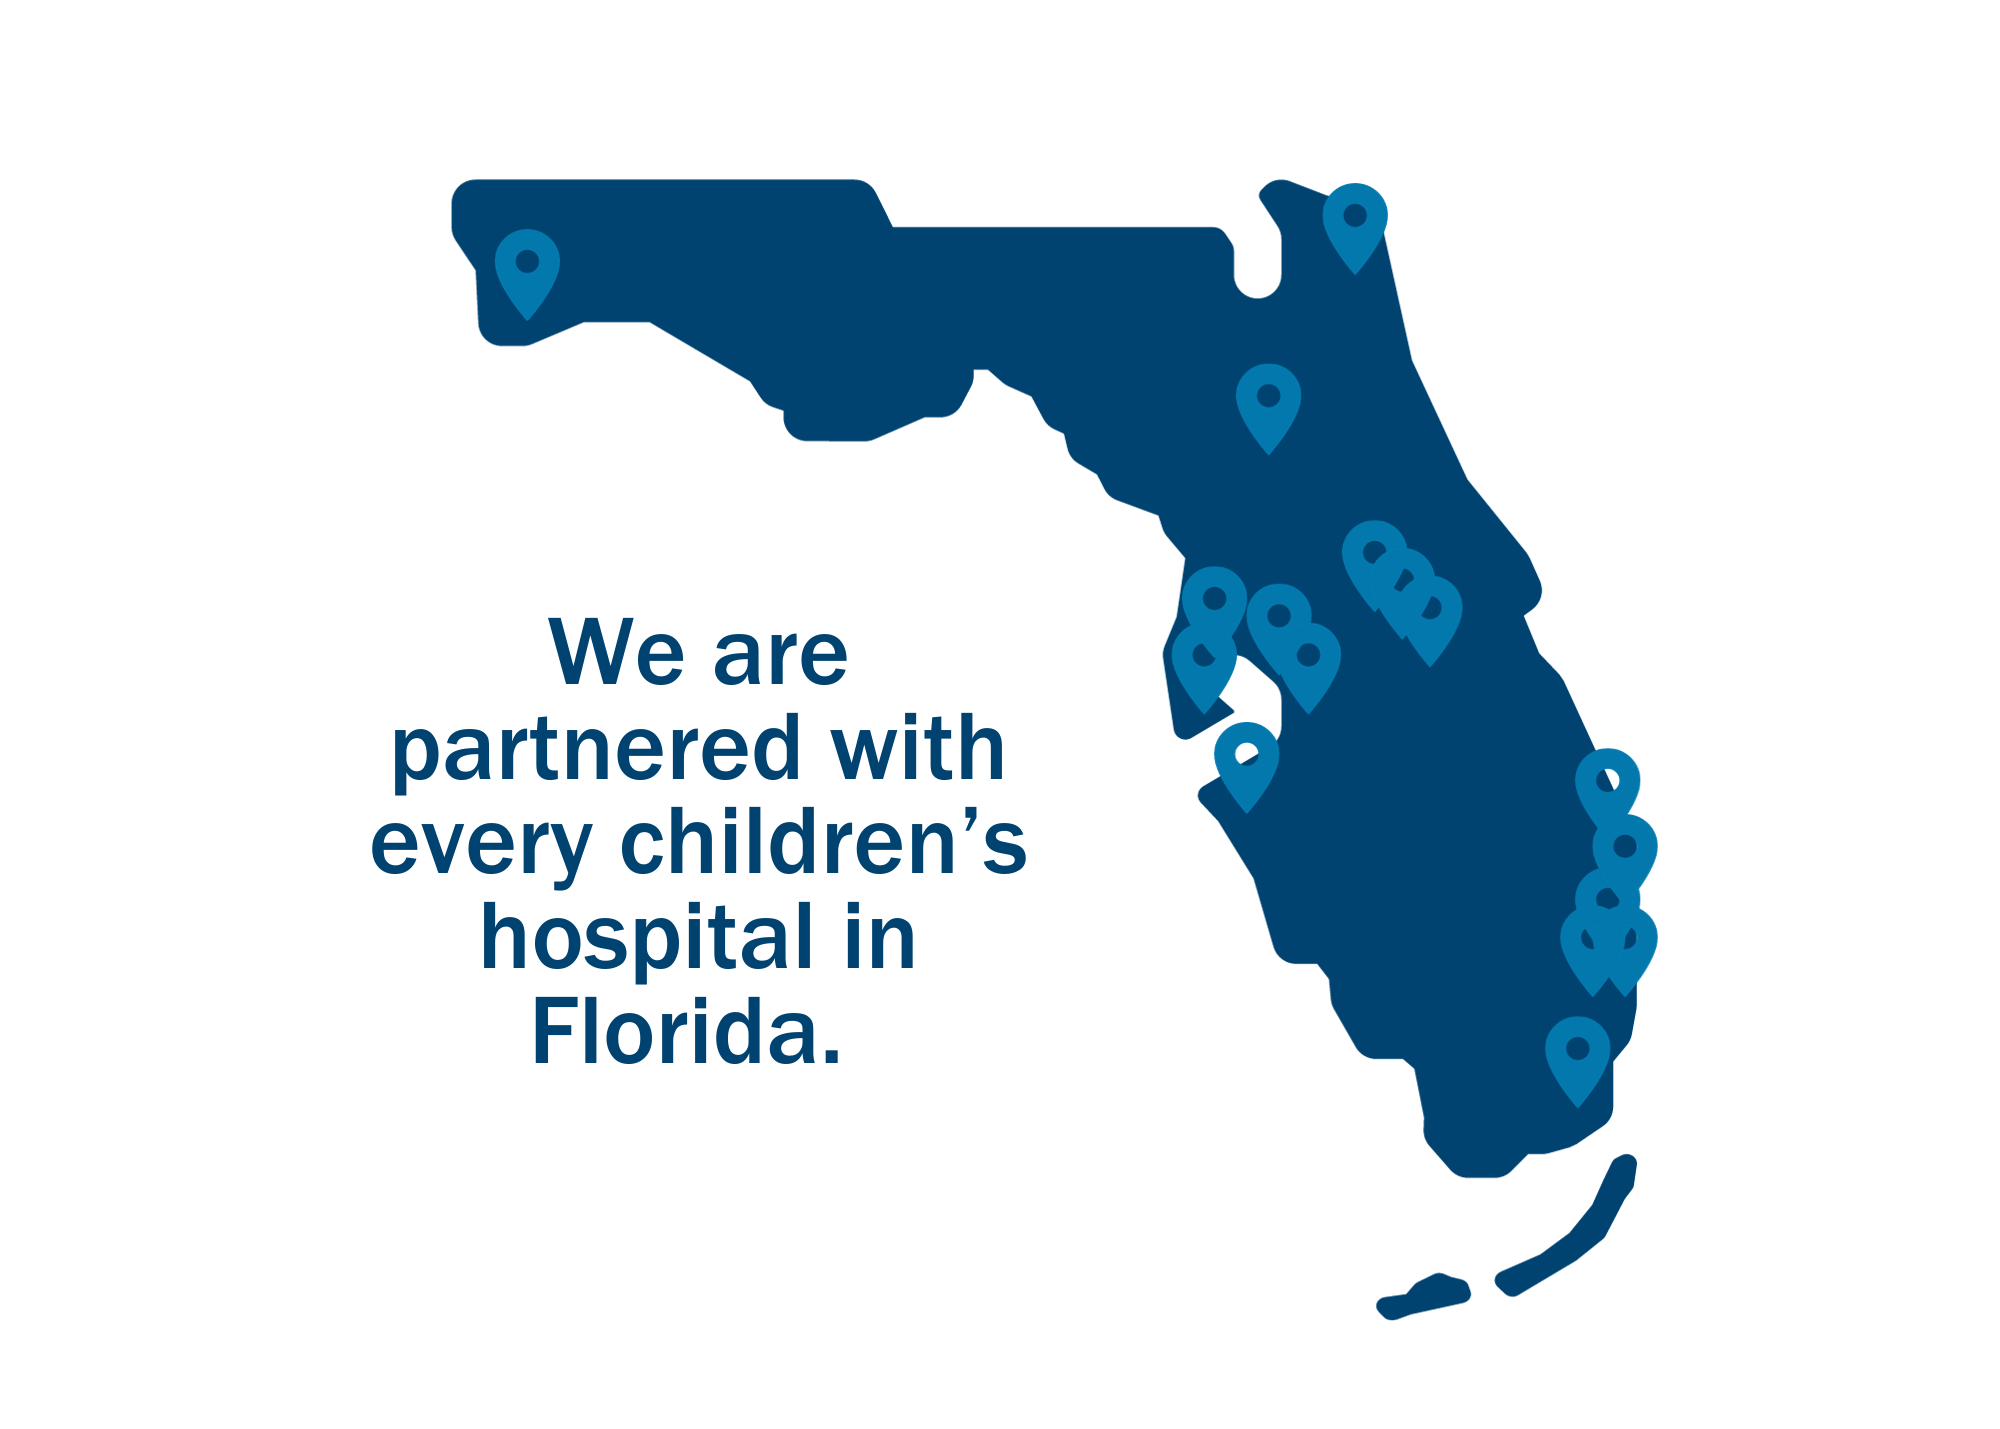 A blue outline of florida with small light blue indicators showing Roc Solid partner hospital locations